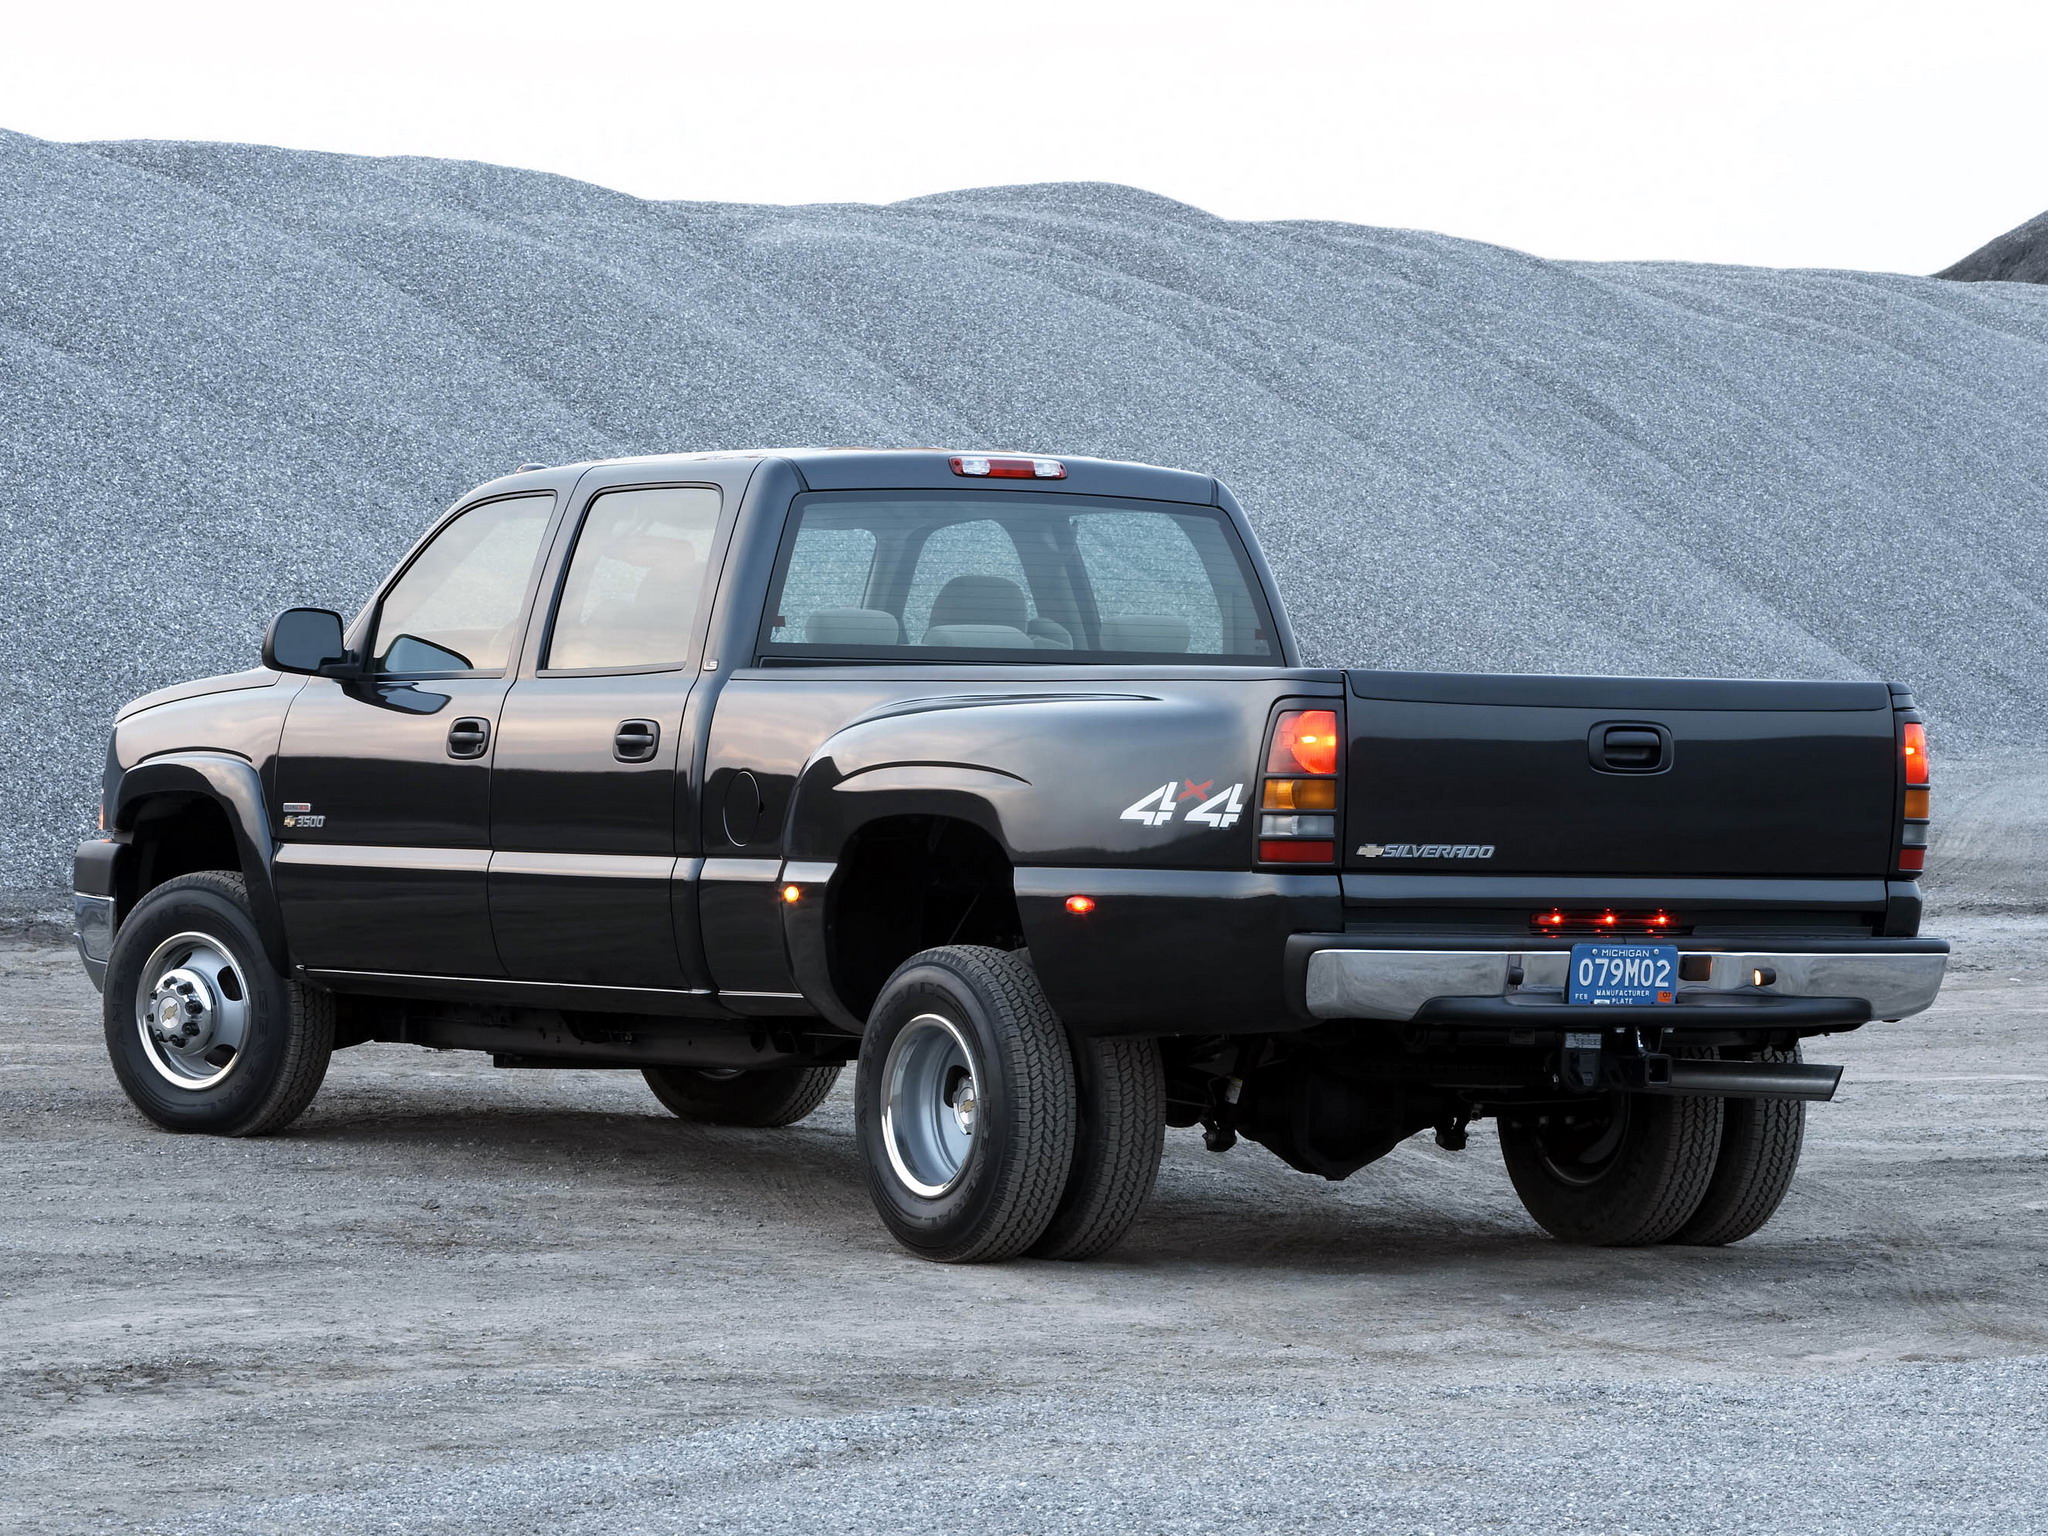 2006 Chevy Silverado 3500 HD Crew Cab Shown with Select SPO Accessories. Model with Manual Transmission. X06CT_SH019